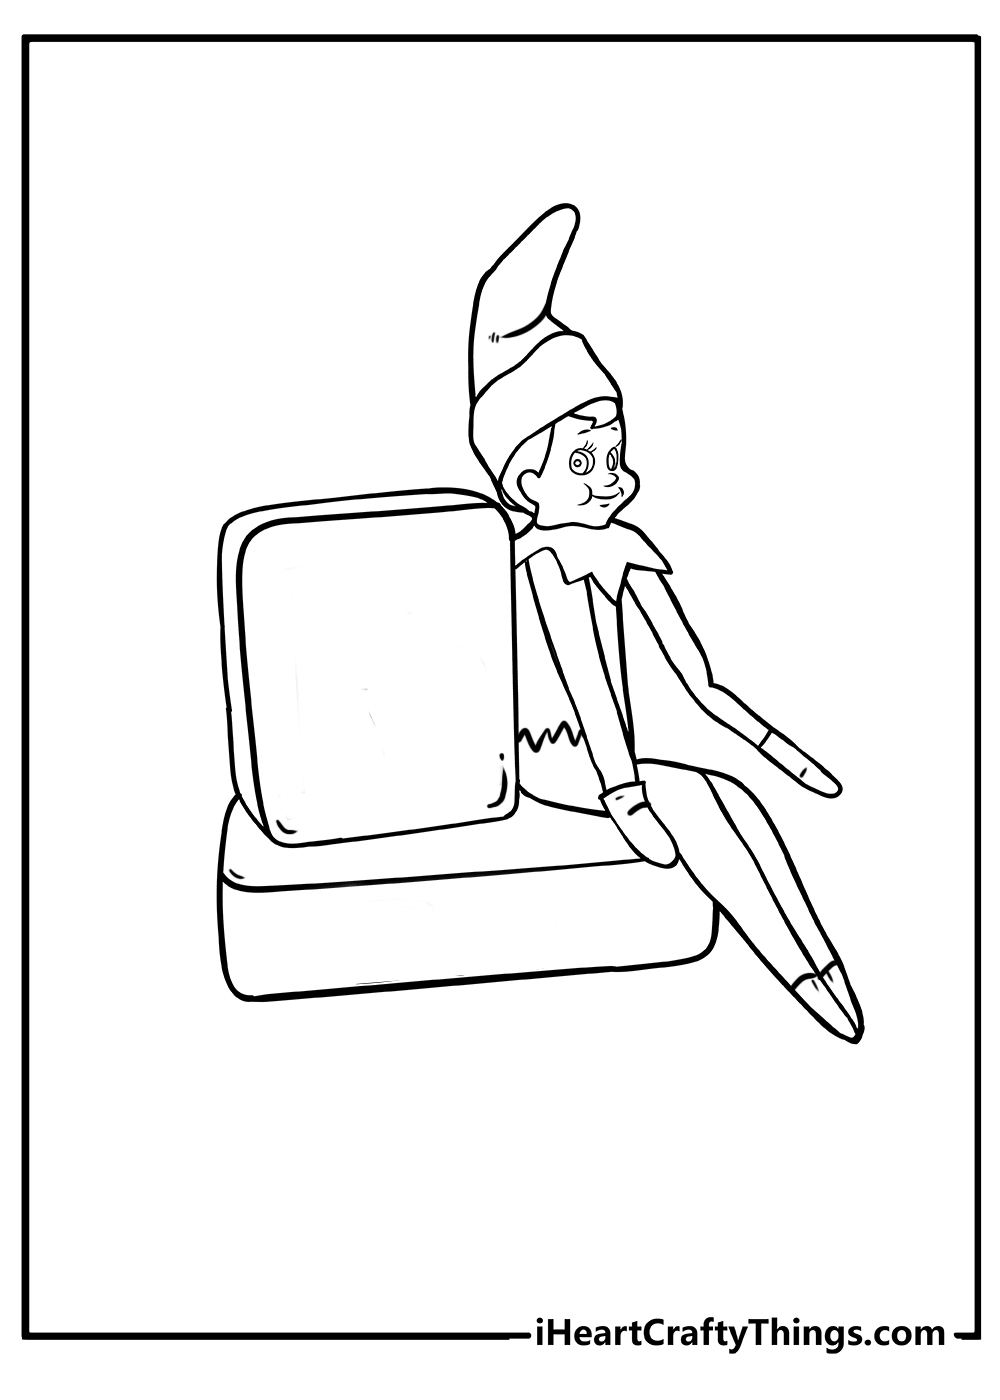 easy Elf on the Shelf Coloring Pages